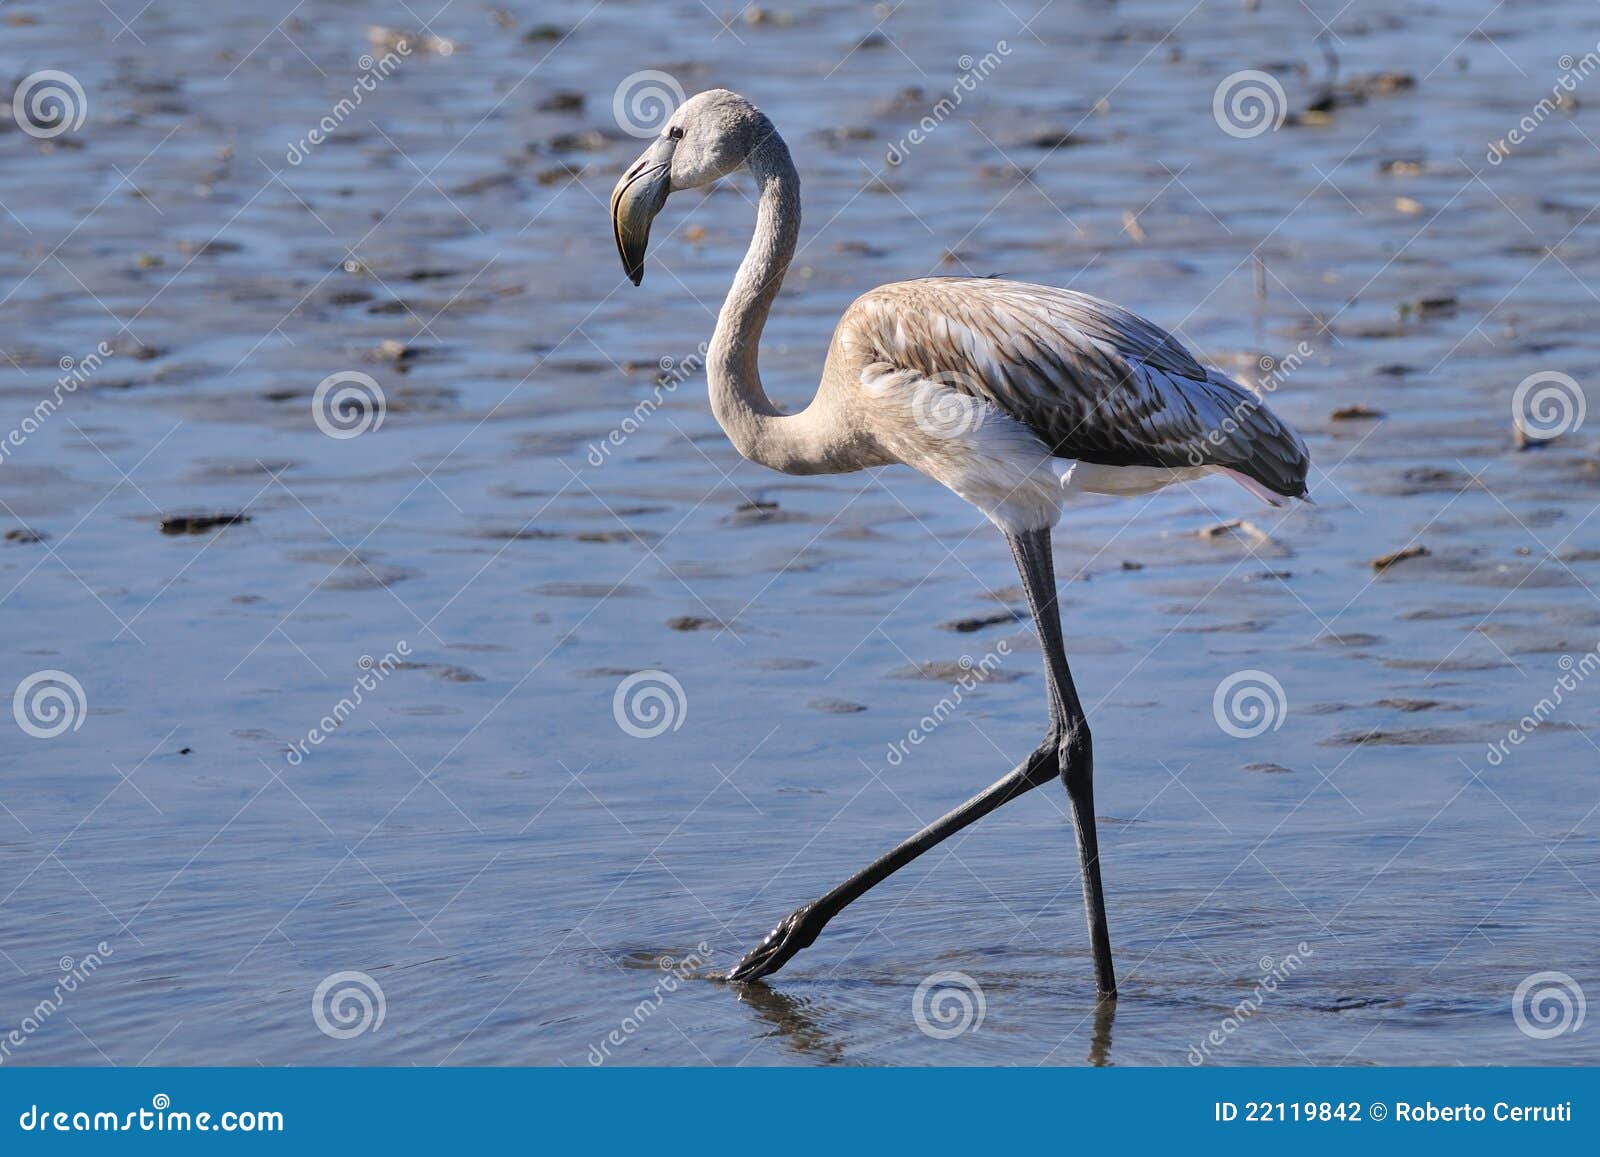 Juvenile Greater Flamingo Hunting in Shallow Water Stock Photo - Image ...